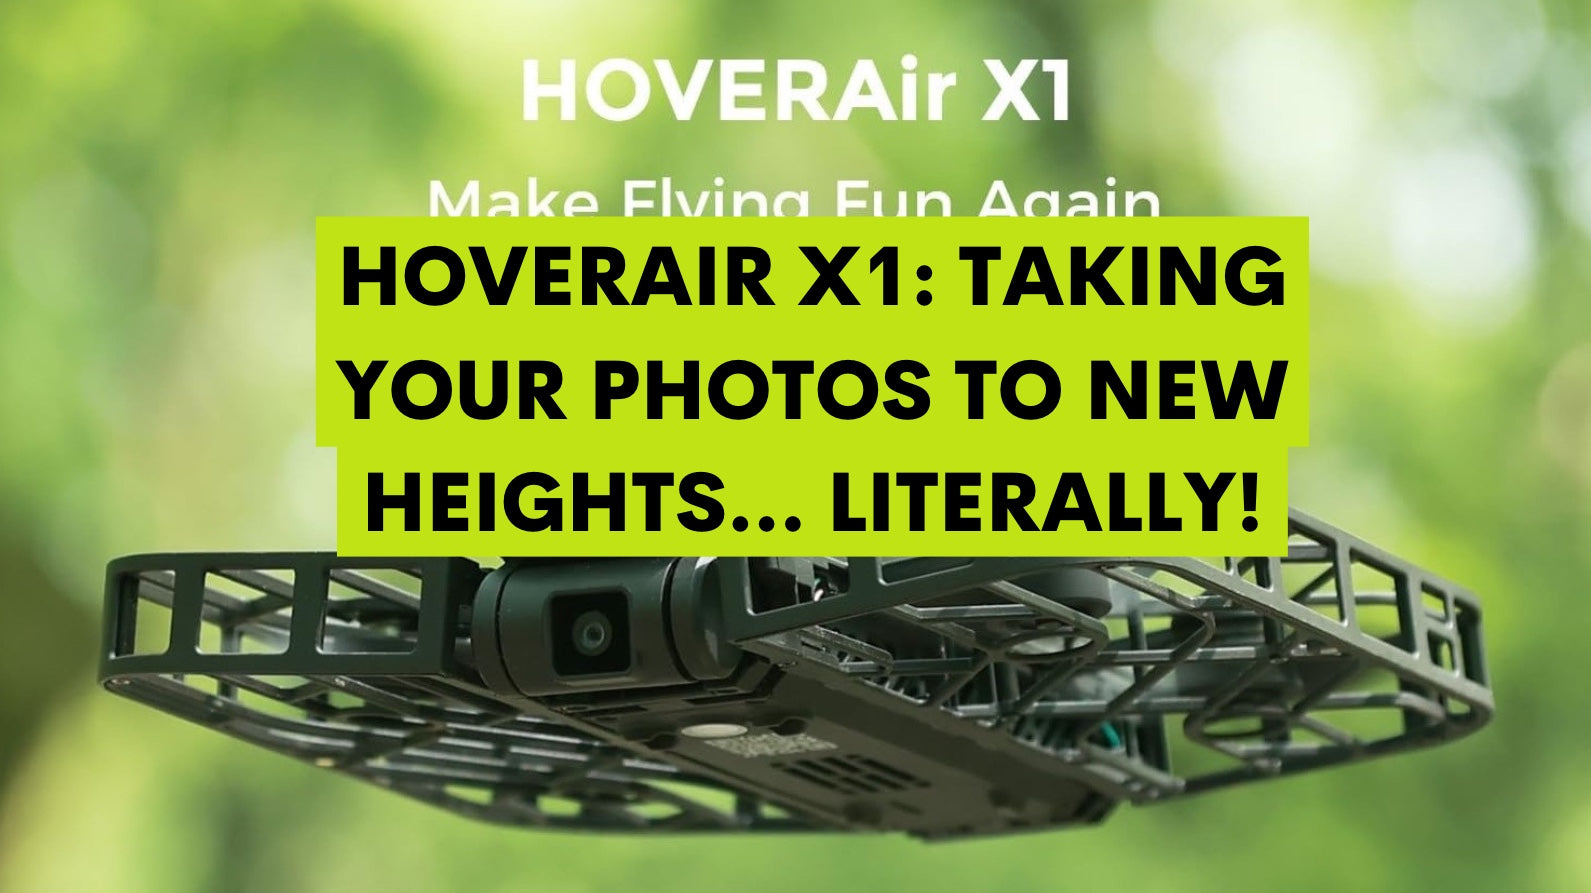 HOVERAir X1: Taking Your Photos to New Heights... Literally!